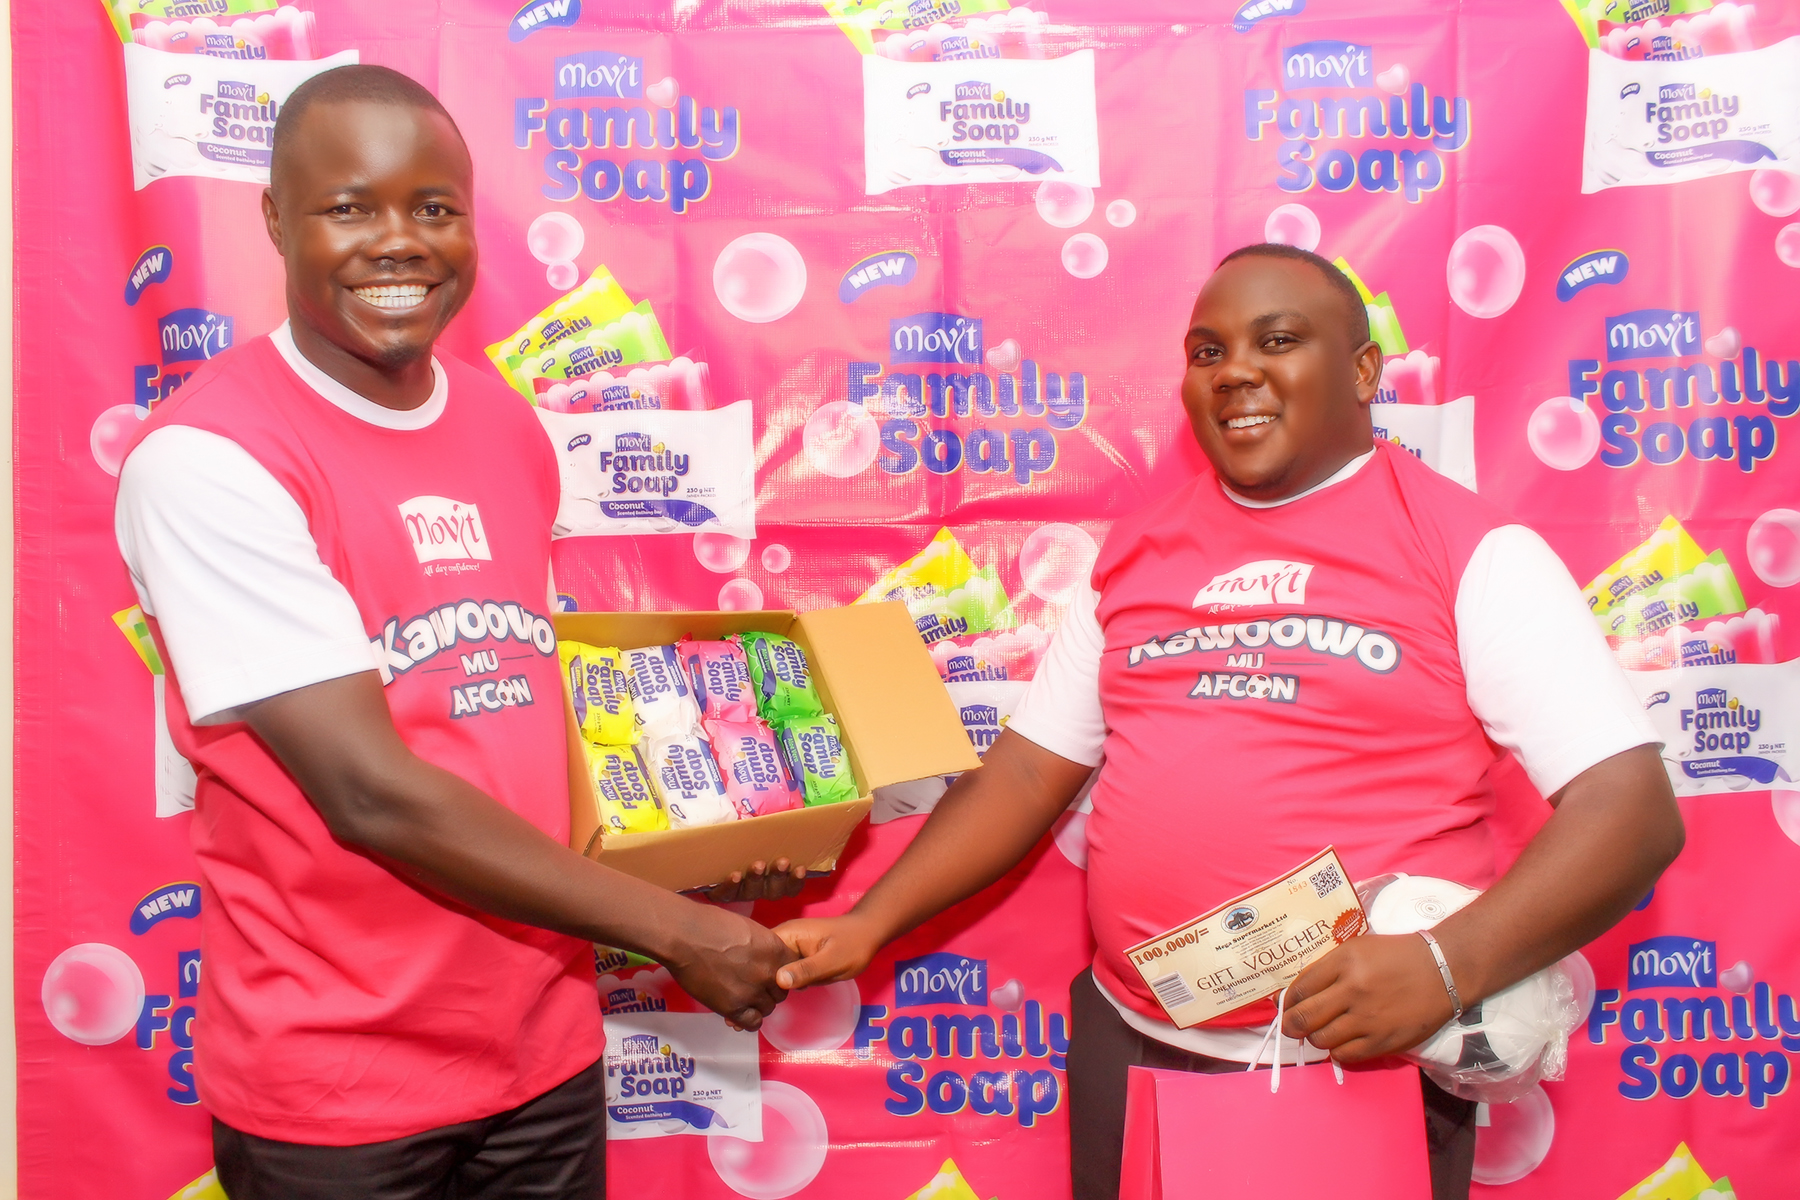 Movit Brand Manager Mr. Stephen Adinyai handing over the gifts to the AFCON Finals winner Ron Hemed.